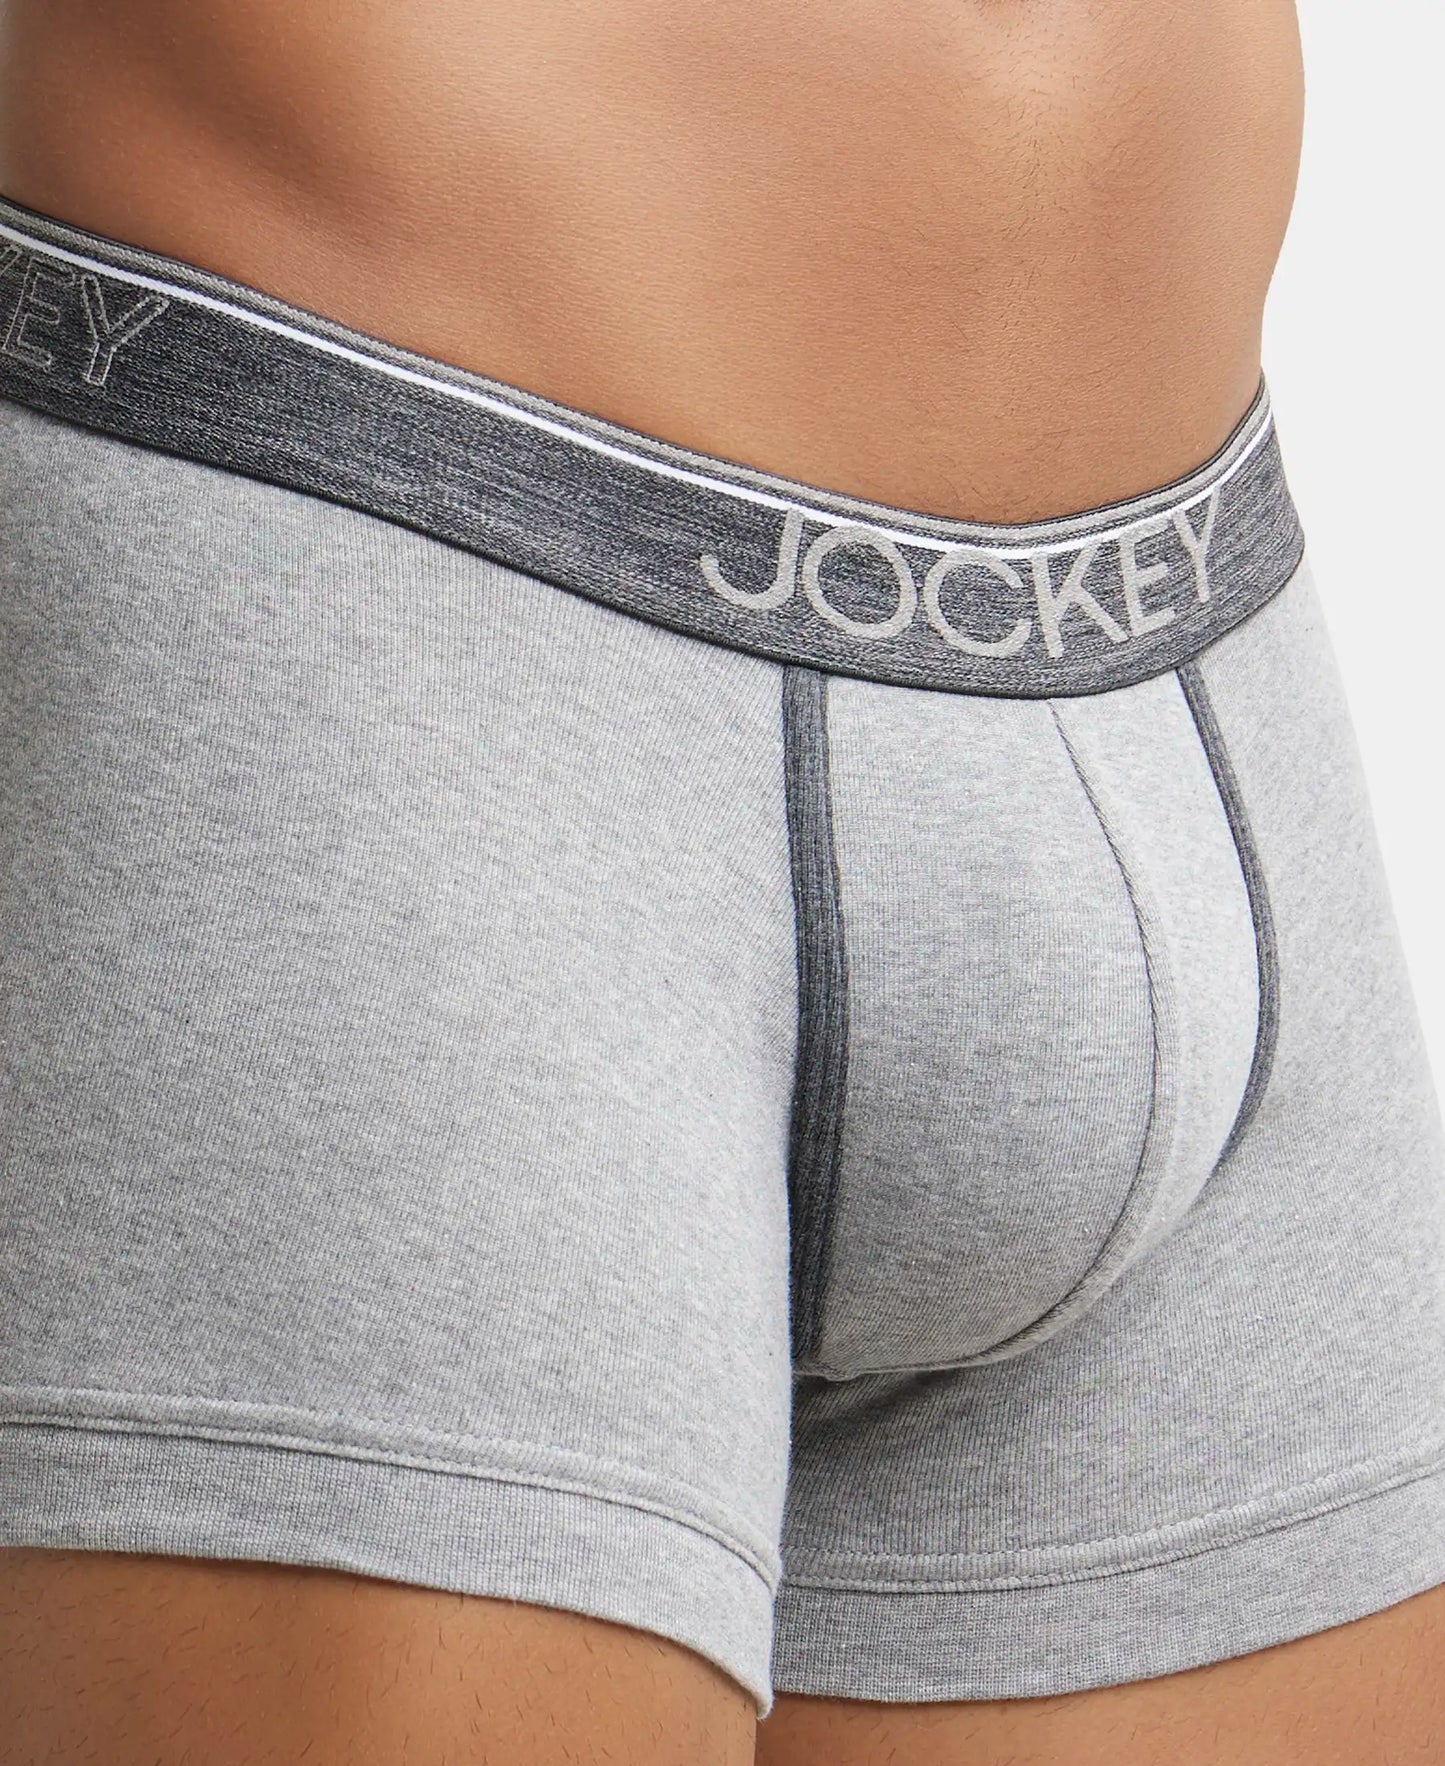 Super Combed Cotton Rib Solid Trunk with Ultrasoft Waistband - Grey Melange (Pack of 2)